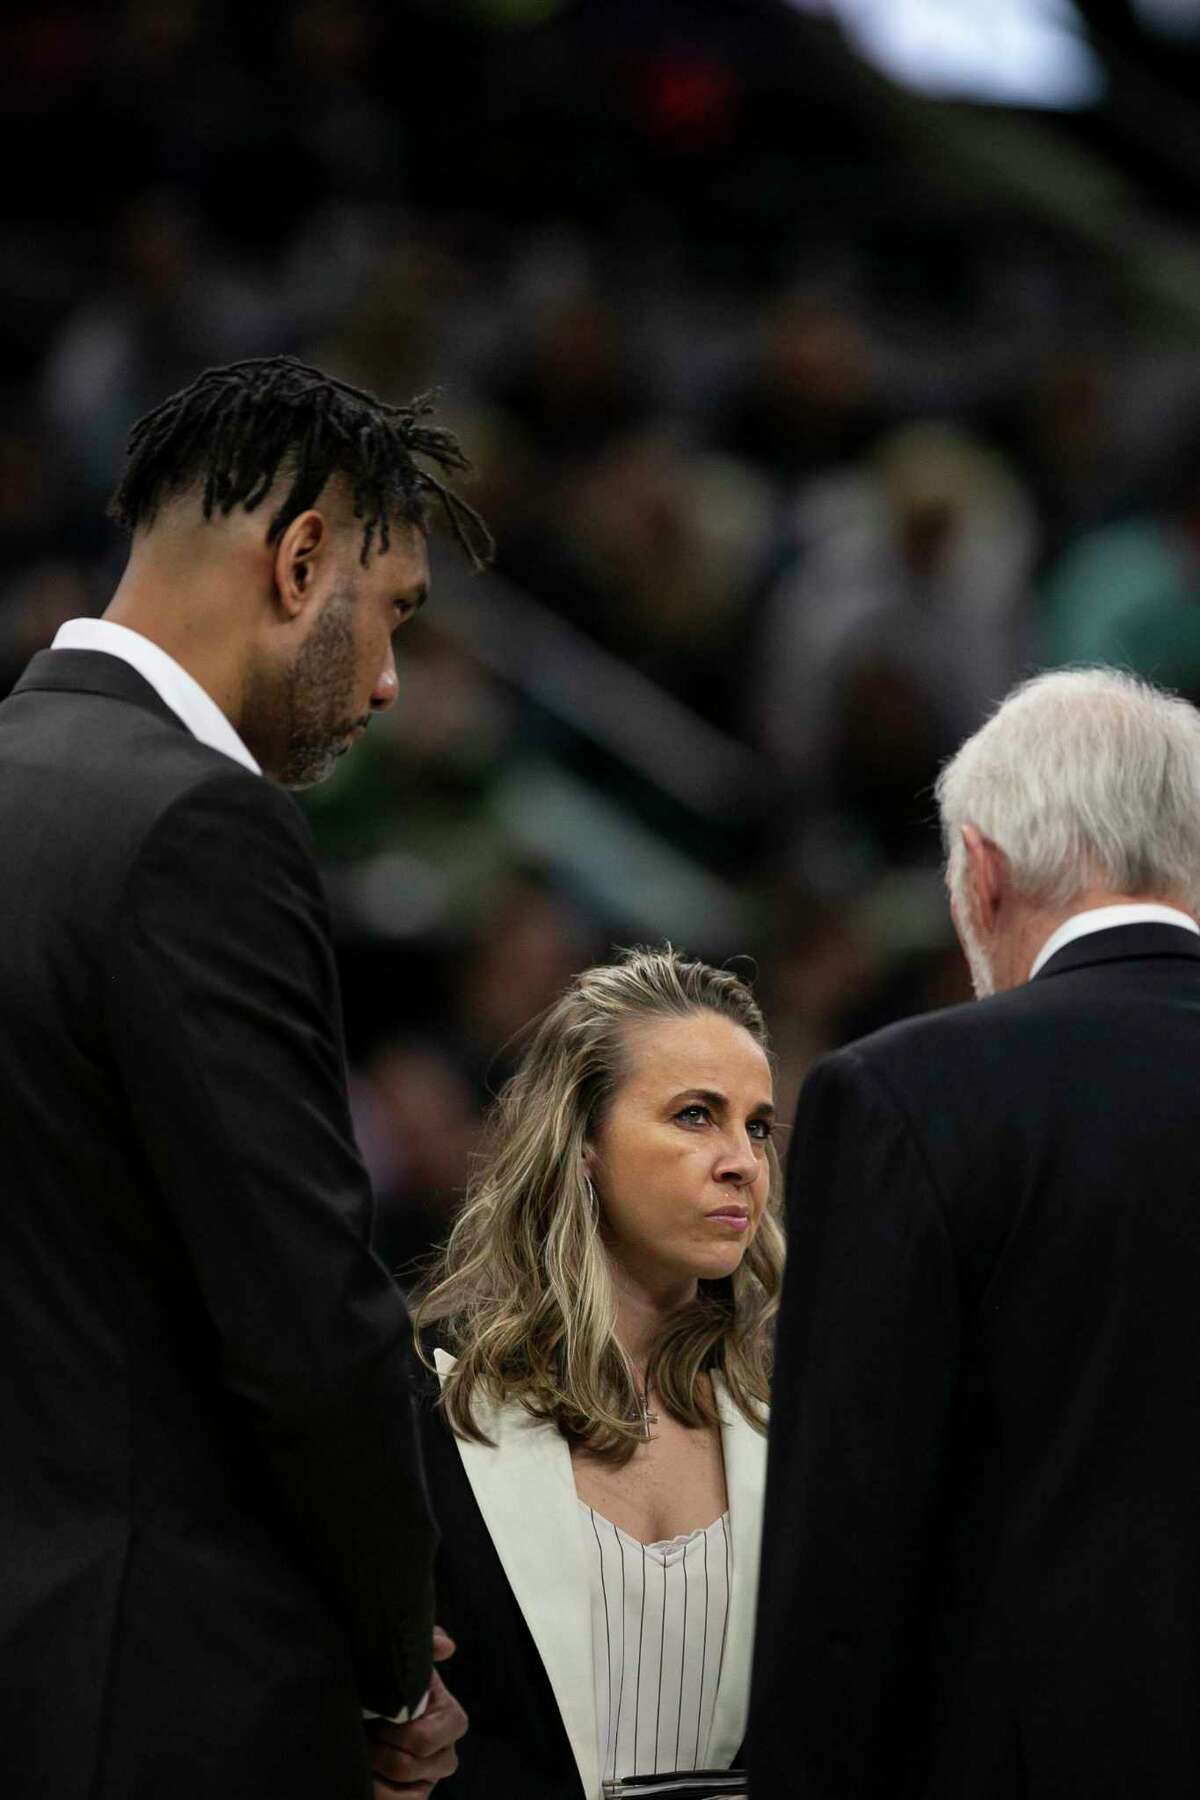 San Antonio Spurs' Assistant Coach Becky Hammon listens to Head Coach Gregg Popovich during a timeout during the Spurs' game against the Bucks at AT&T Center in San Antonio, Texas, Jan. 6, 2020.